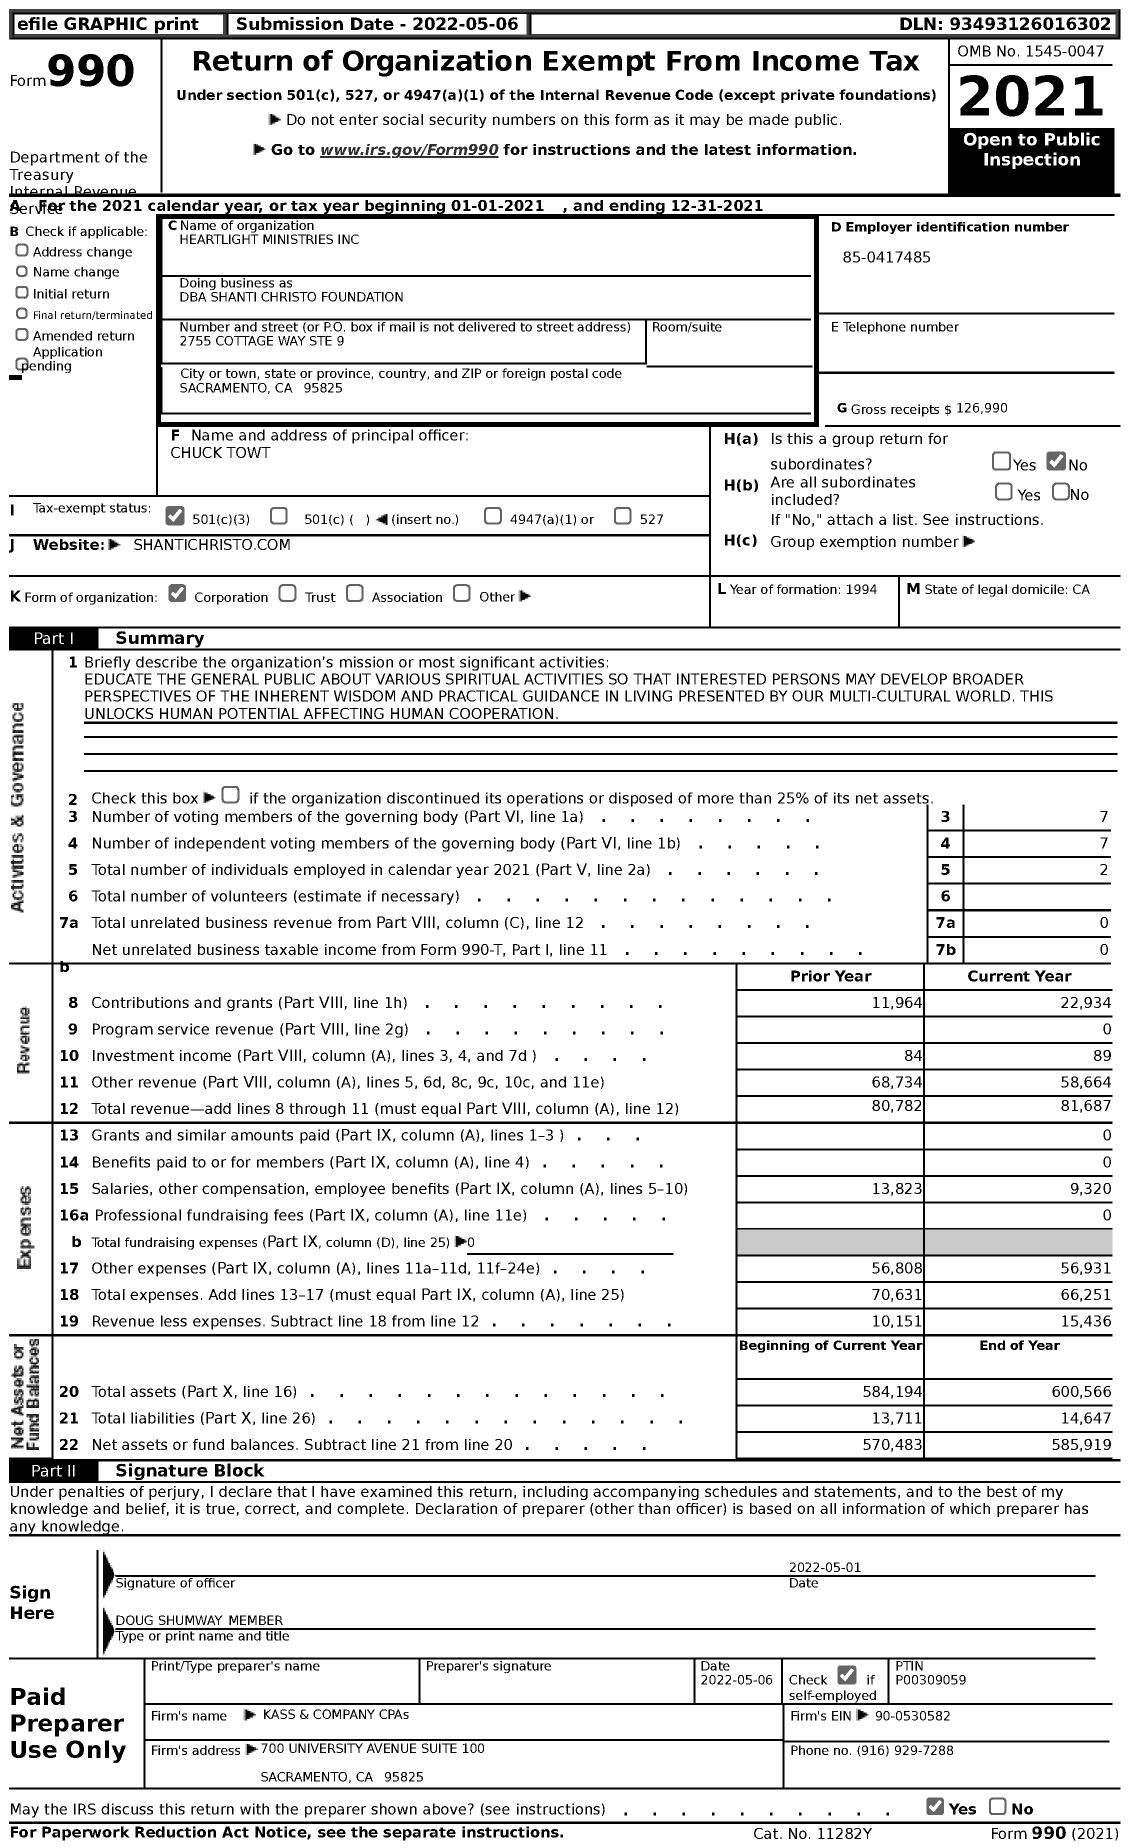 Image of first page of 2021 Form 990 for Shanti Christo Foundation